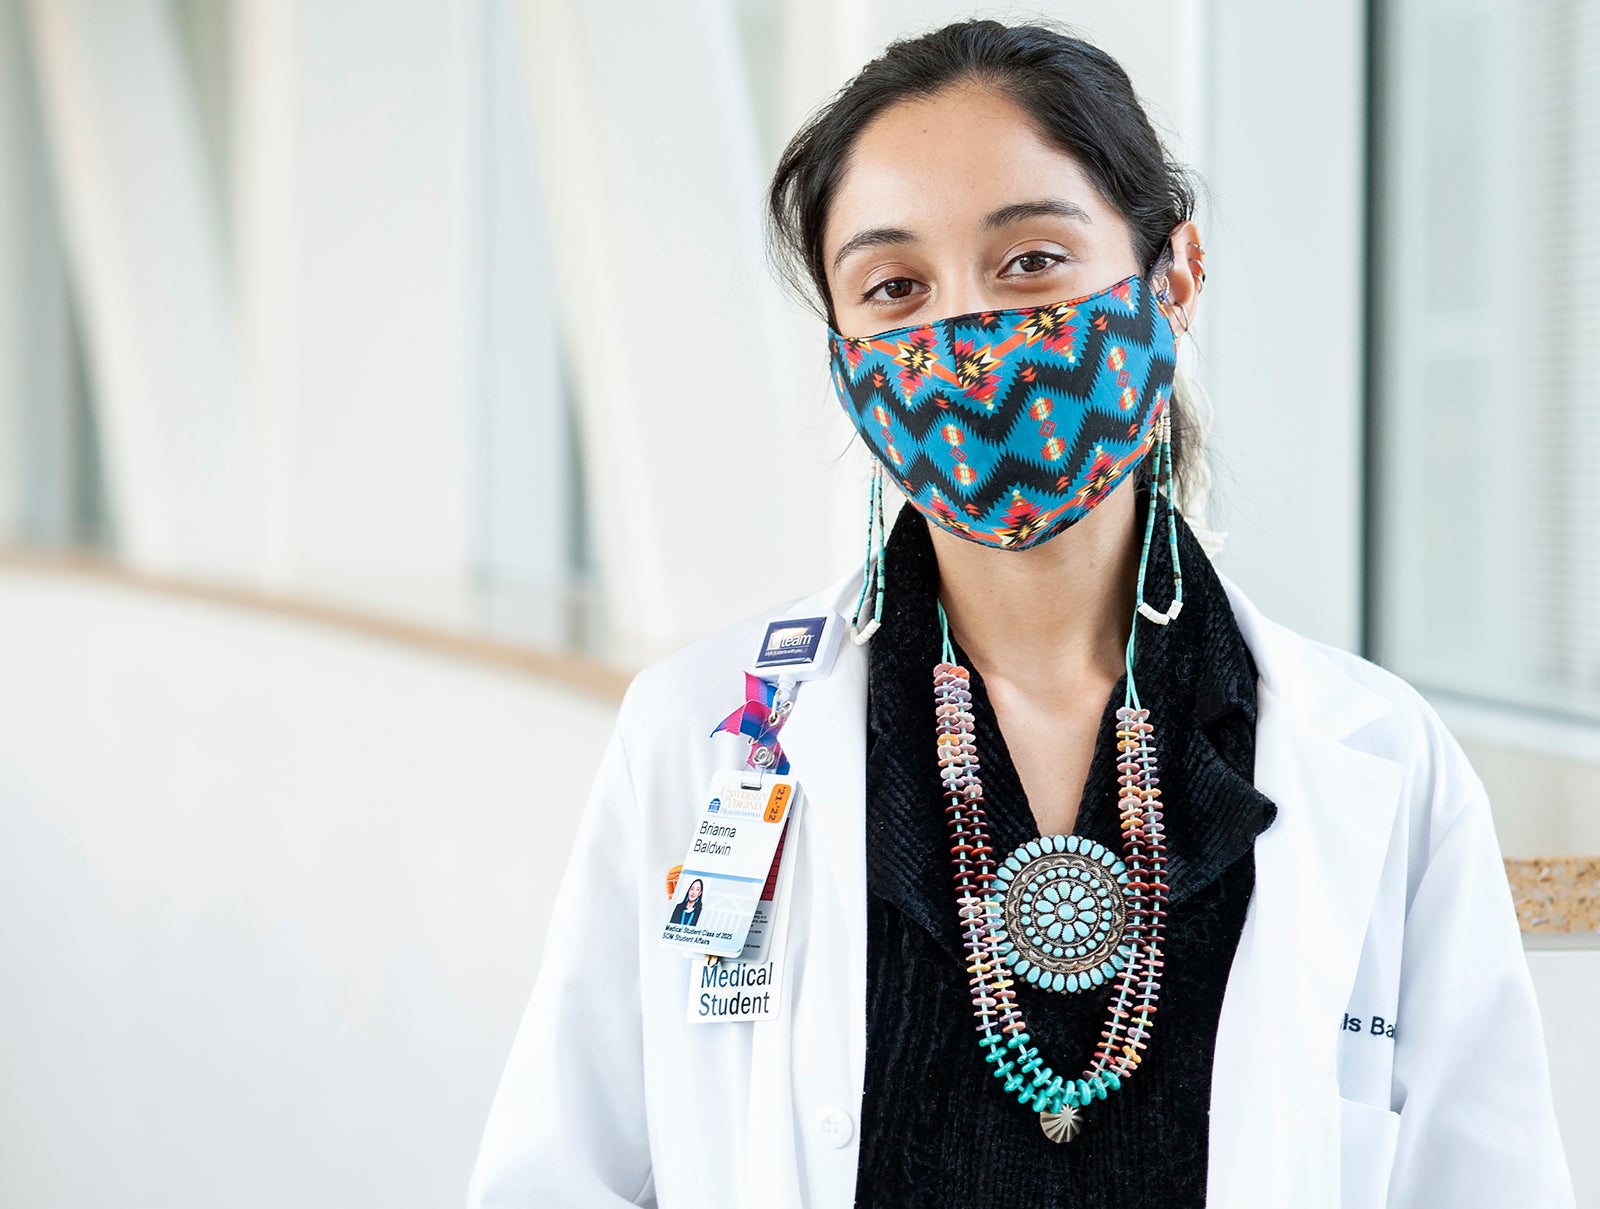 Meet Brianna Baldwin, Citizen of the Diné Nation and School of